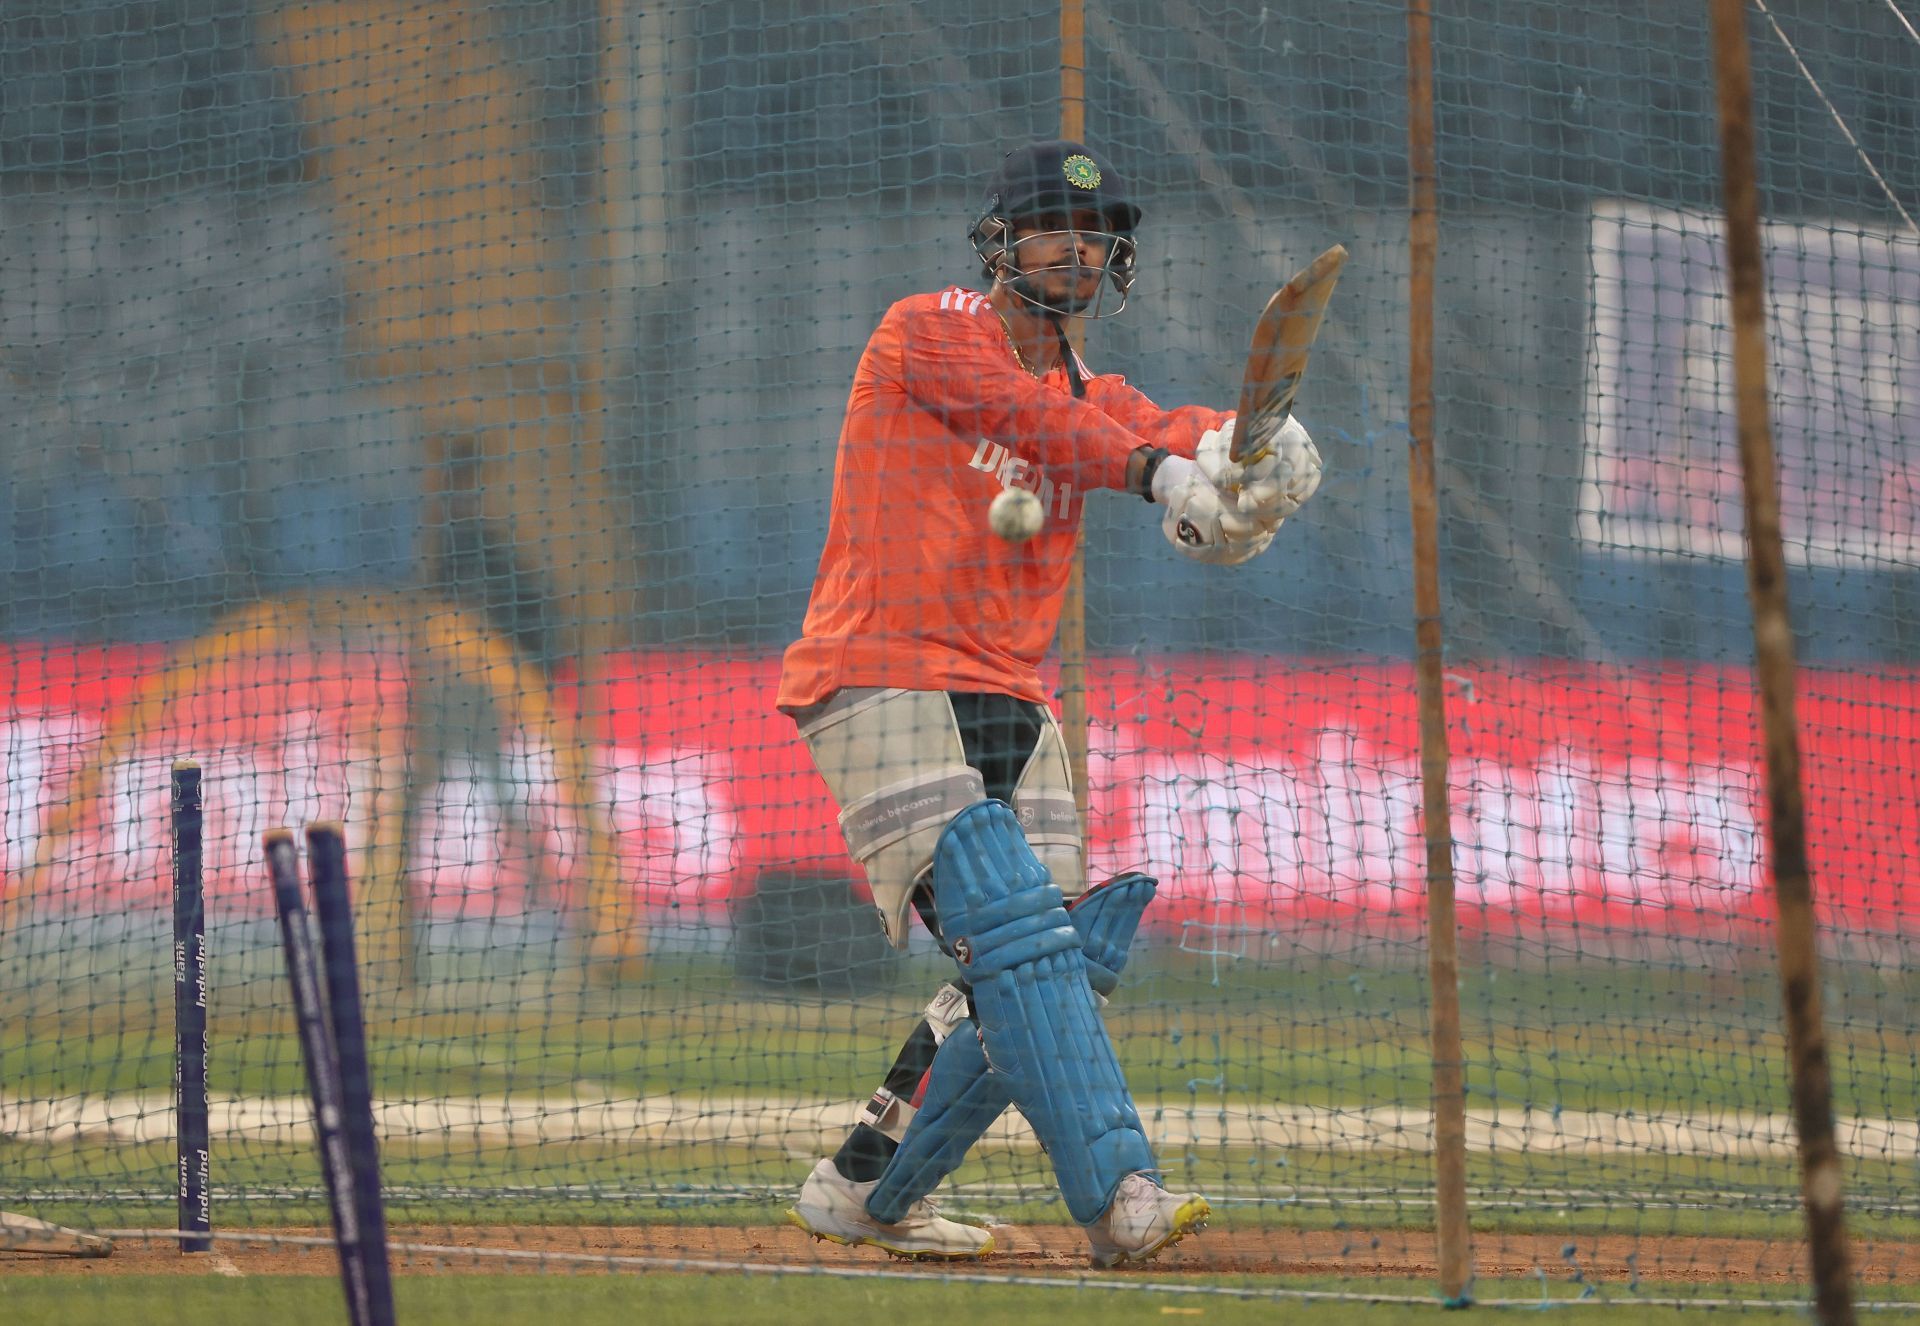 Ishan Kishan will hope to get back to the nets soon in a bid to resume his cricketing career.